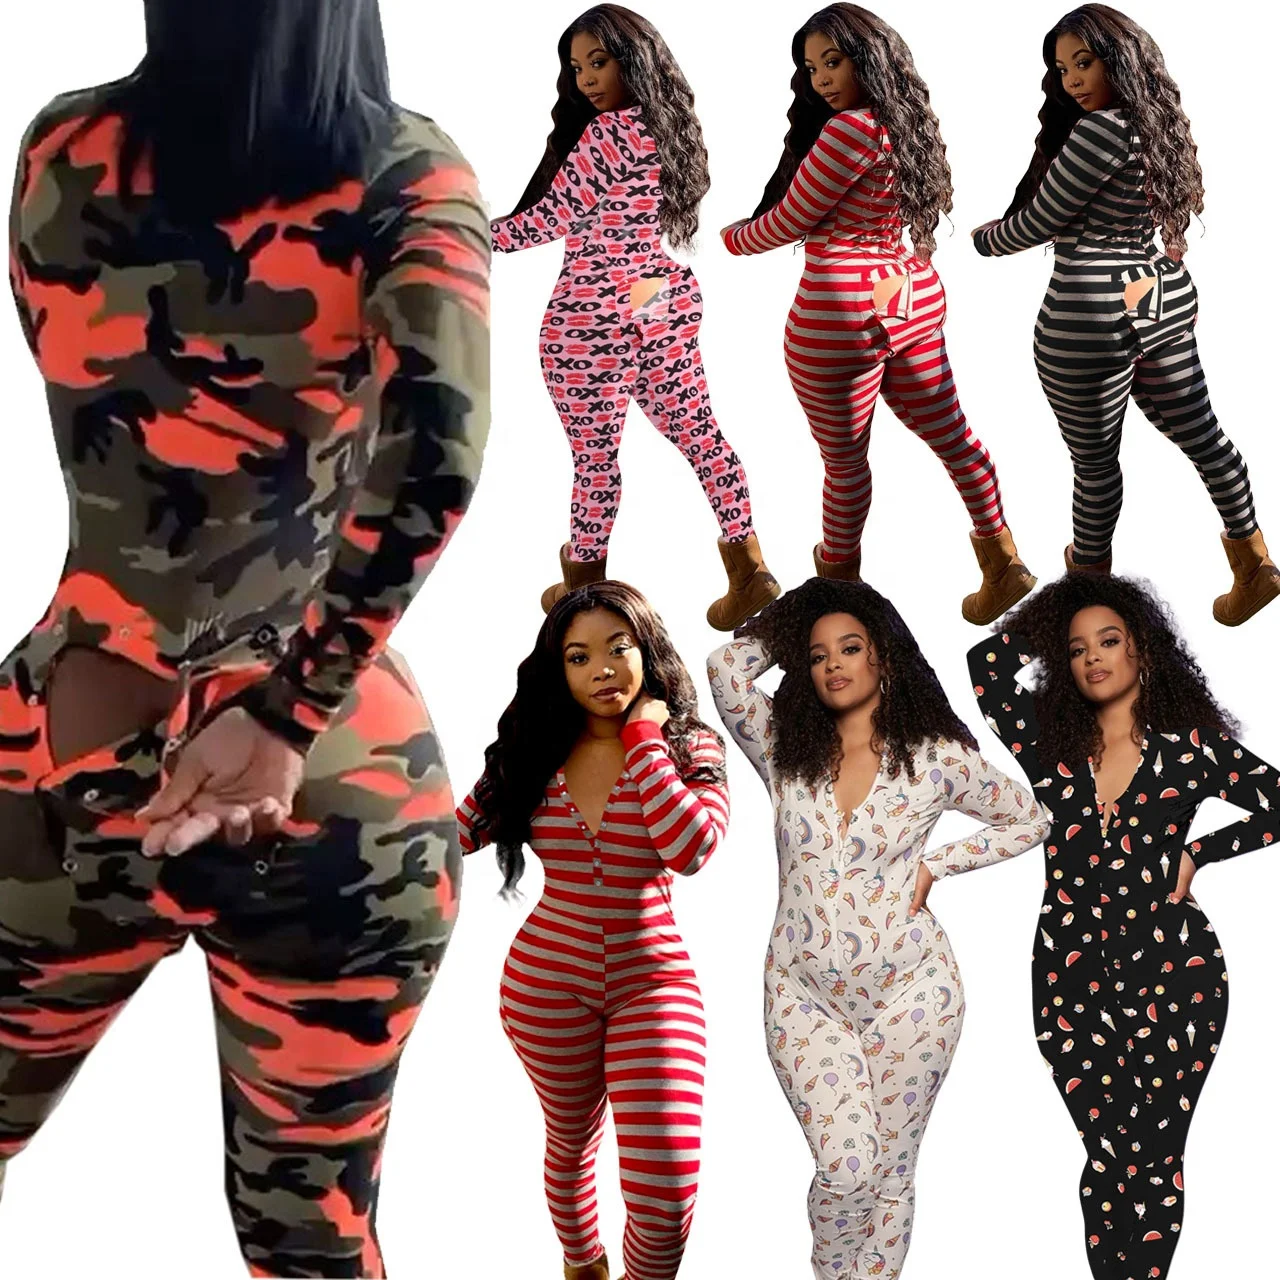 

2021 New Fashion Adult Sexy Long Sleeve Sleepwear V Neck Pajamas Night Onesies with Butt Flap for Women